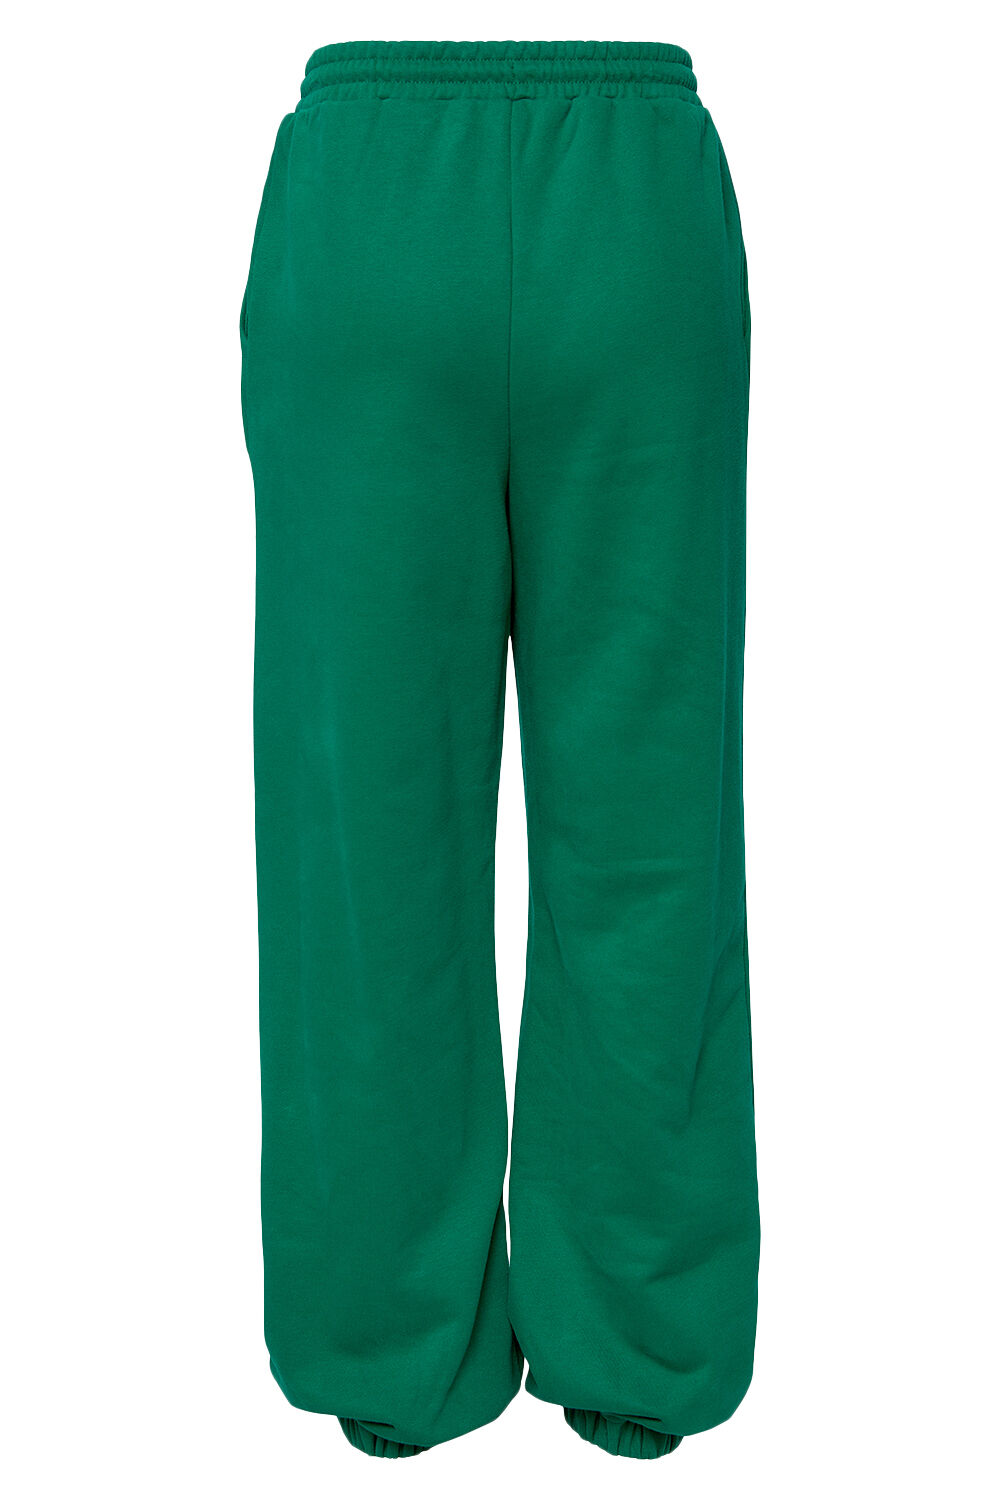 TRACK SWEAT PANT in colour DEEP GRASS GREEN